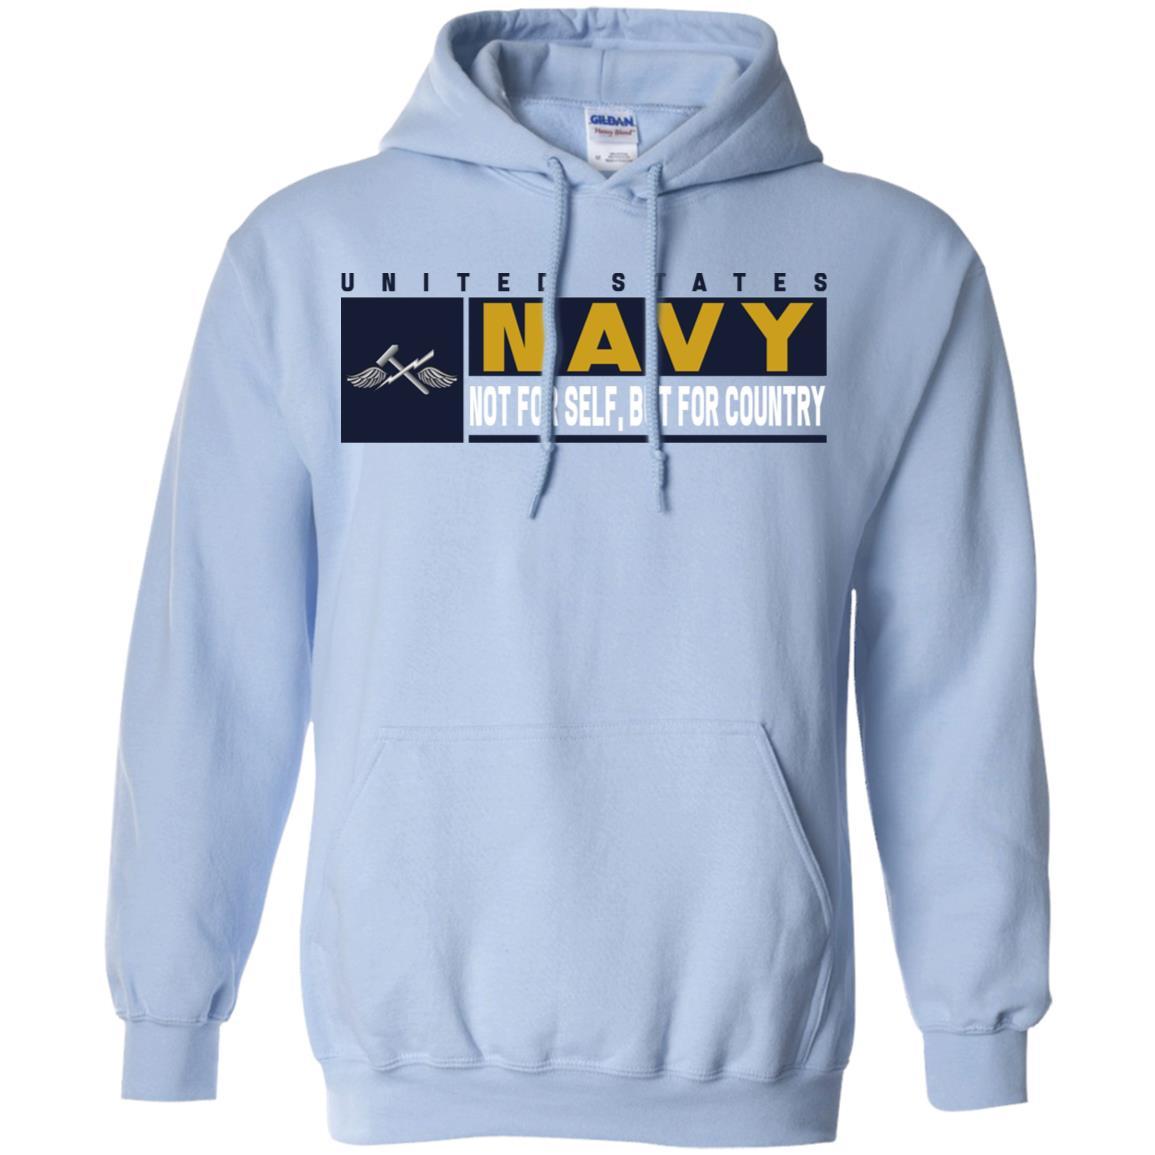 Navy Aviation Support Equipment Tech Navy AS- Not for self Long Sleeve - Pullover Hoodie-TShirt-Navy-Veterans Nation